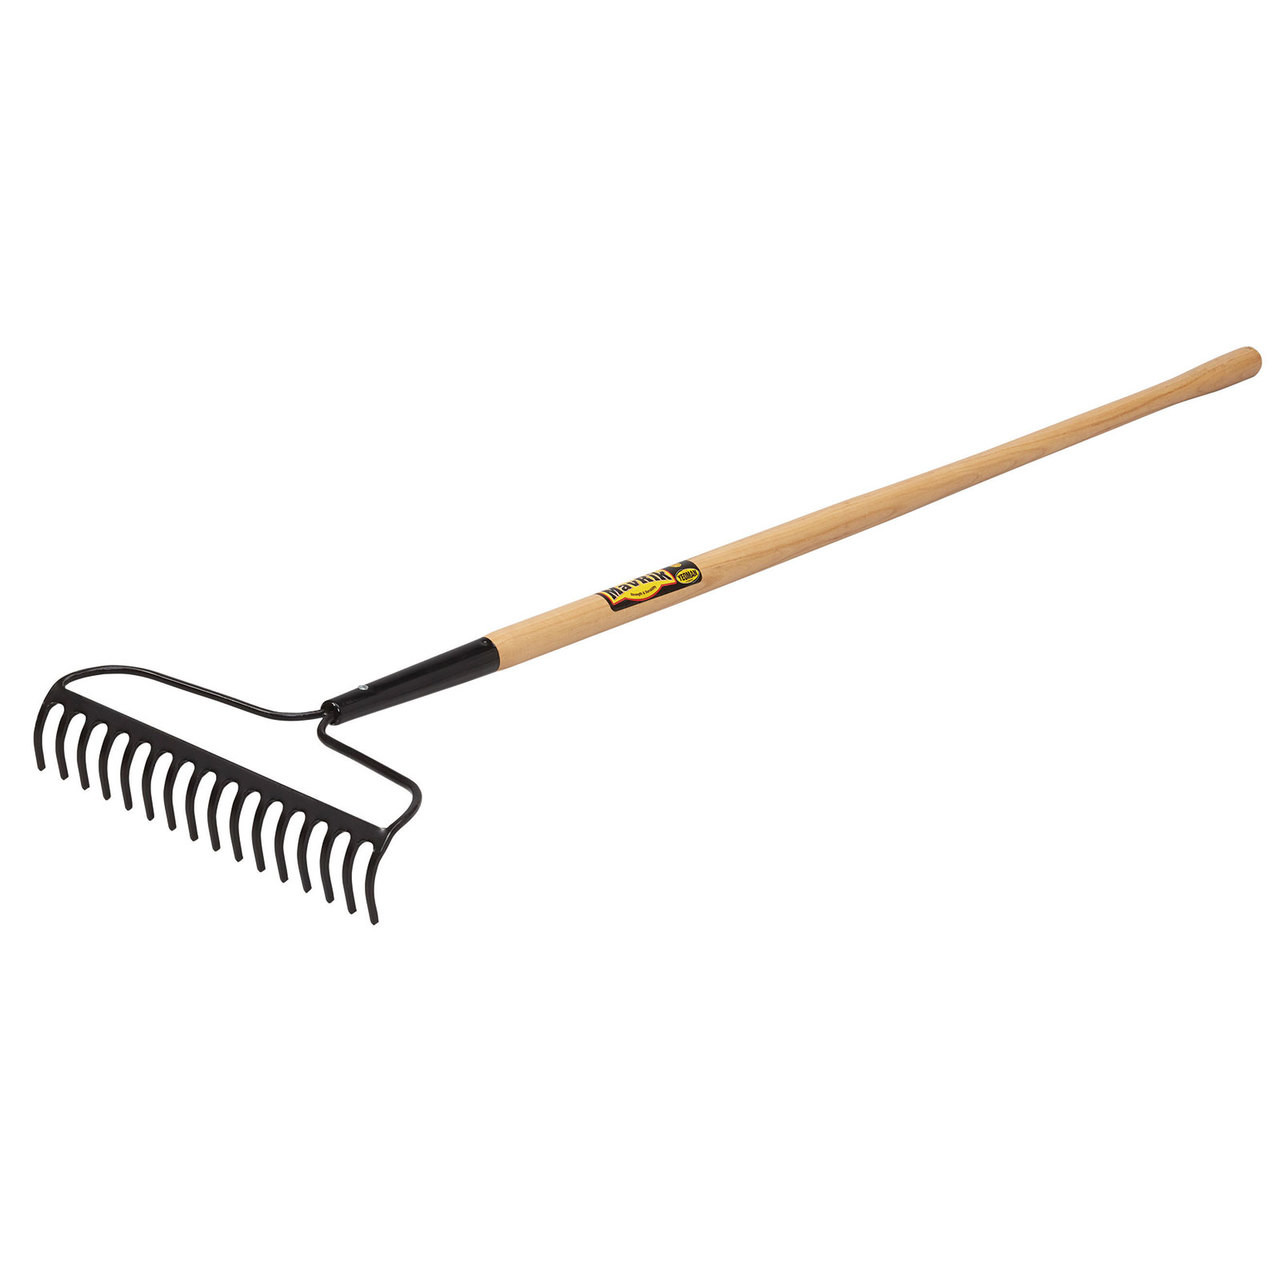 16 Tooth Forged Bow Rake 60” Wood Handle - Lawn & Garden Rakes